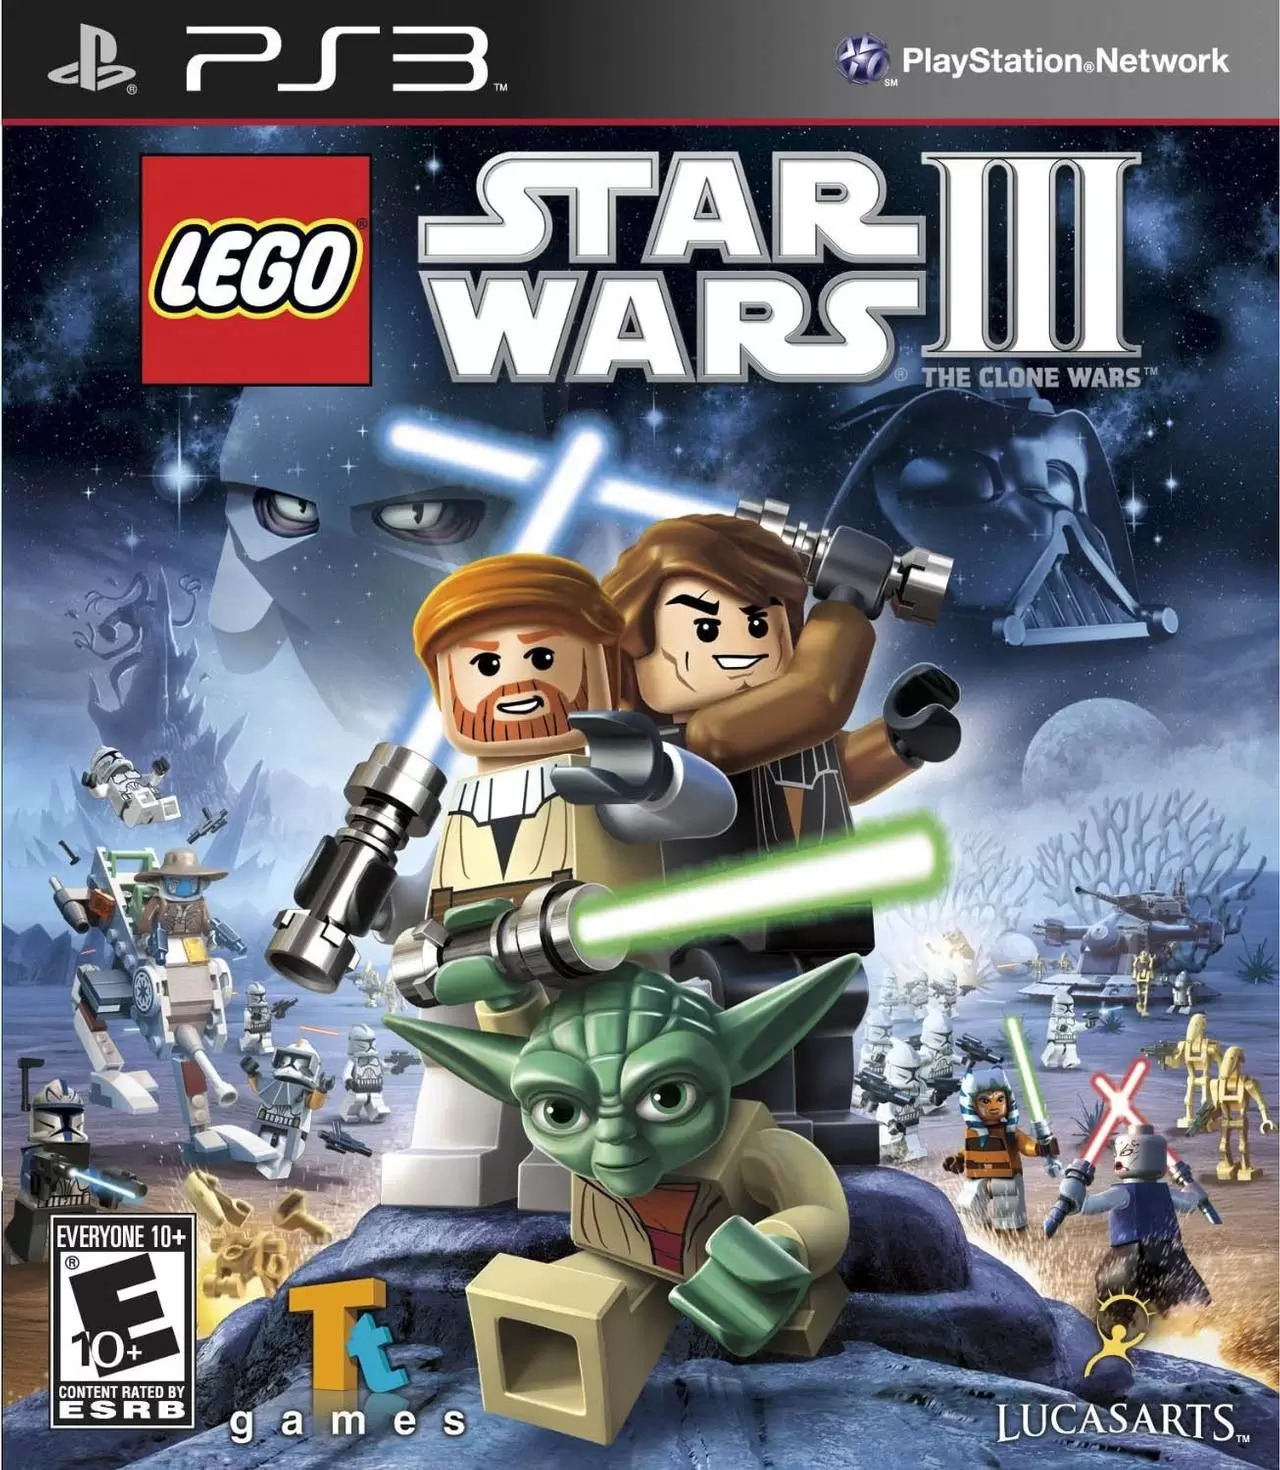 Jeux PS3 - LEGO Star Wars III: The Clone Wars